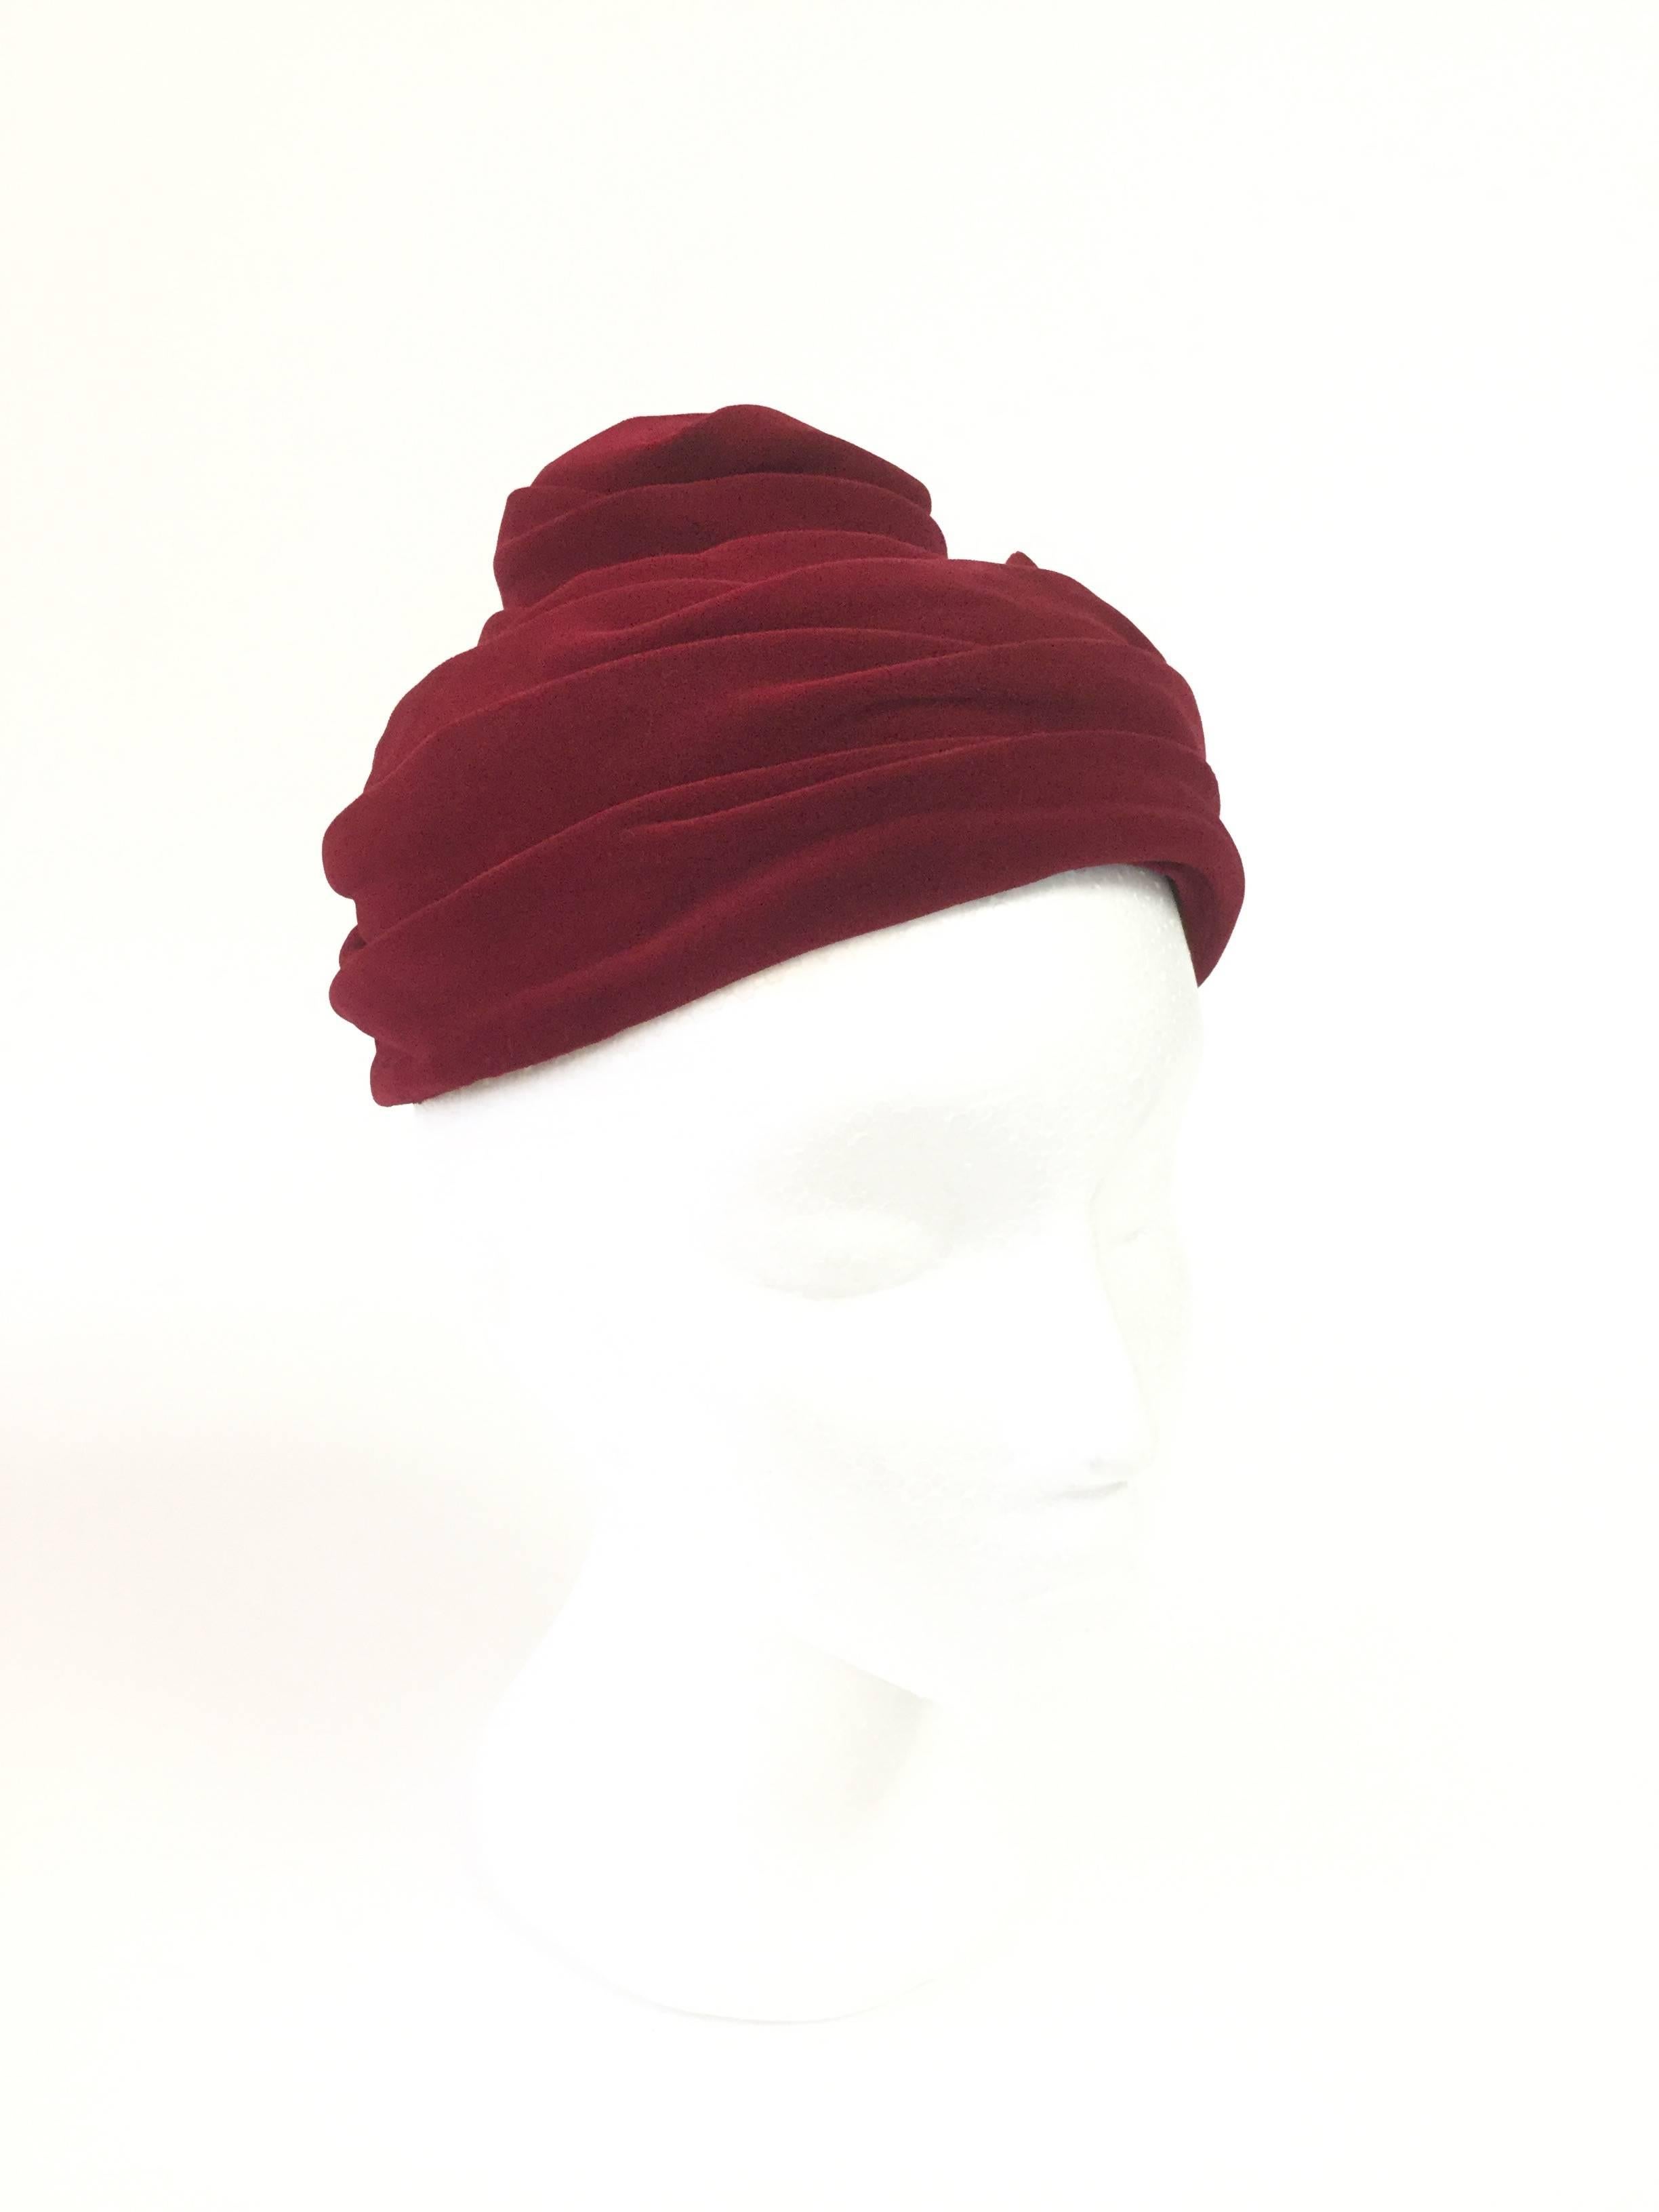 
This absolutely gorgeous toque cap by Miss Sally Victor New York is composed of multiple undulating folds of red velvet. The toque cap sits delicately on top of the wearers head and features a notch in the back as both a design element and as a